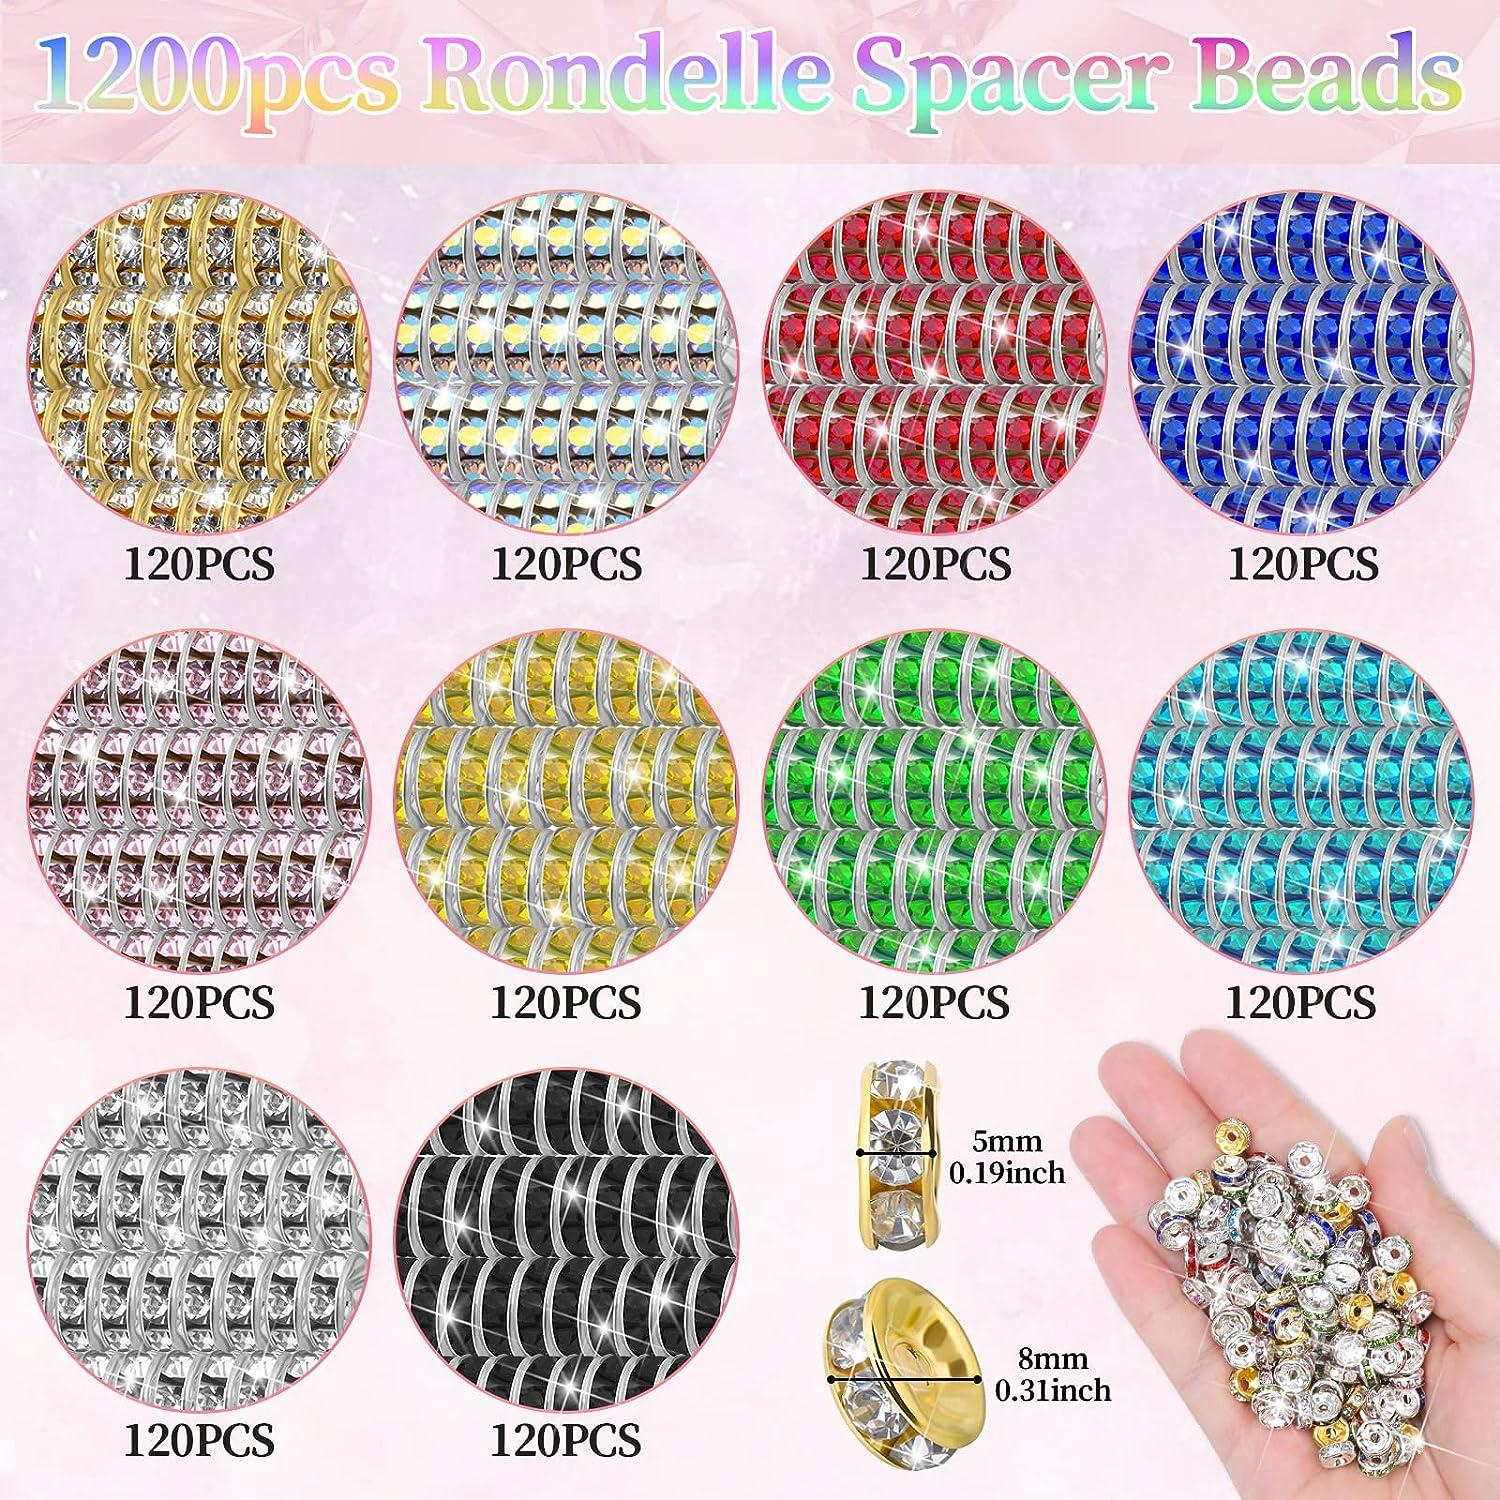 Cludoo Rondelle Spacer Beads for Jewelry Making 1200 pcs 8mm Rhinestone Spacer  Beads 10 Colors Crystal Beads Spacers for Jewellery Making Bracelet  Necklaces DIY Craft